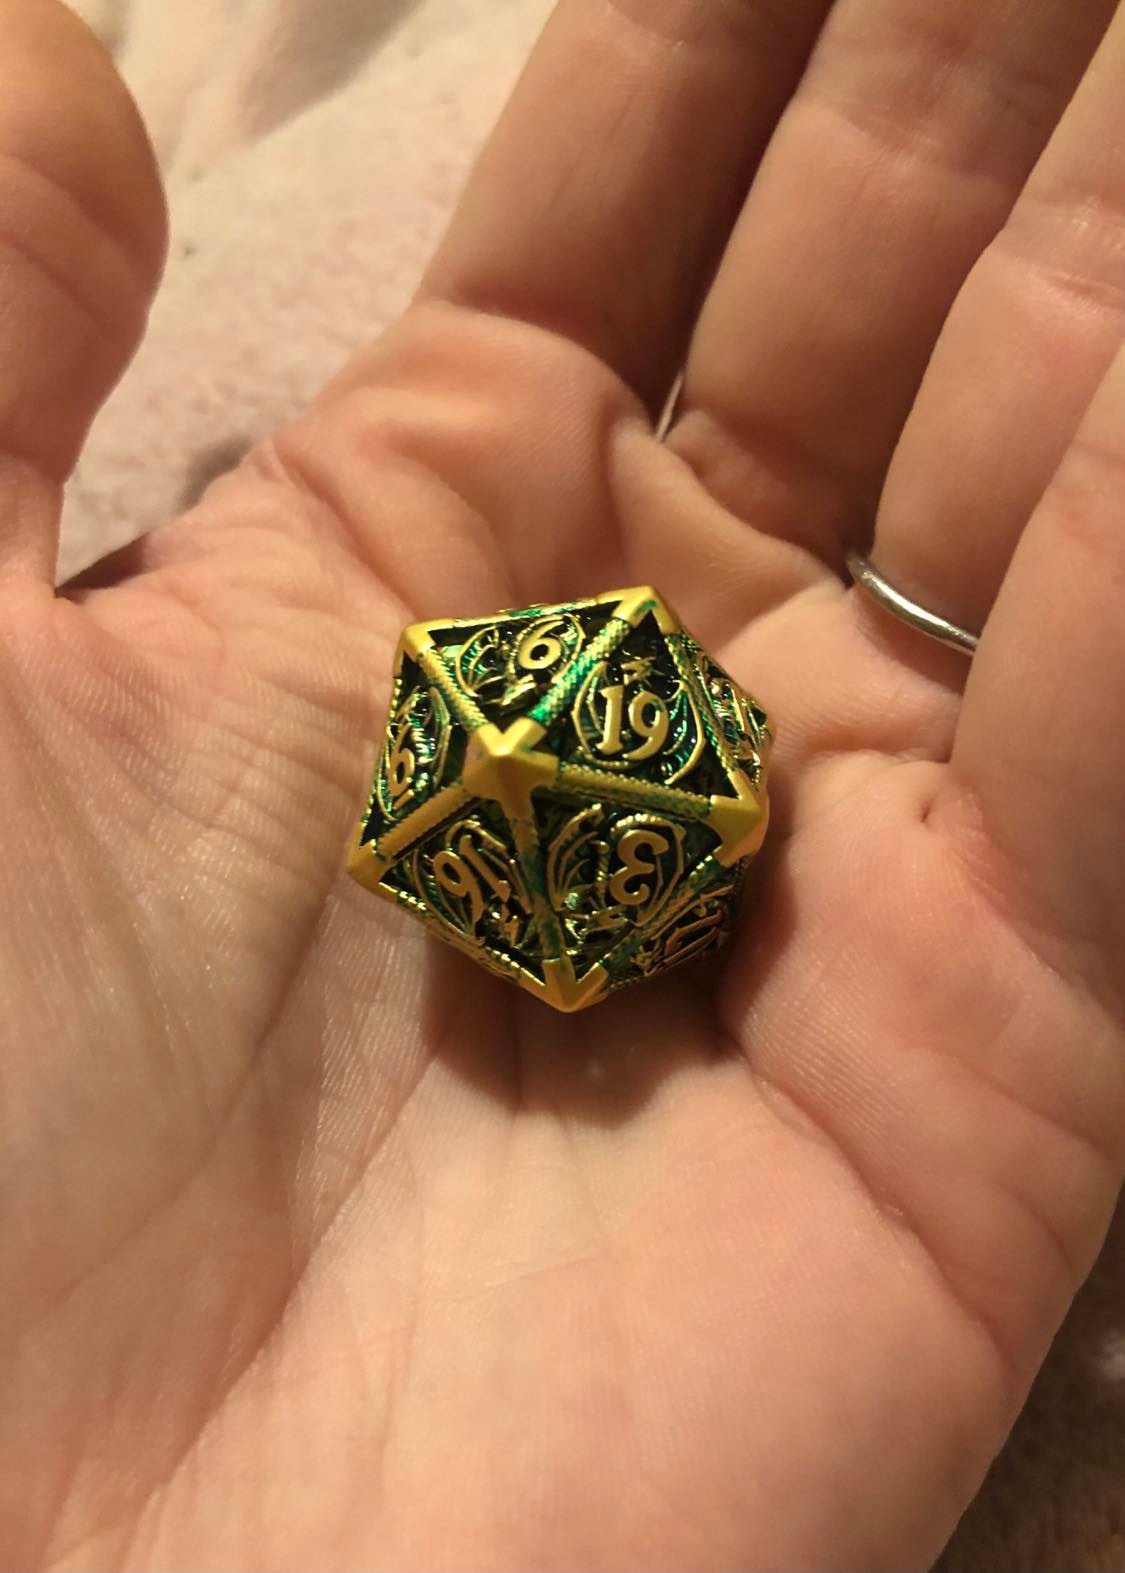 A closeup of the hollow metal dragon dice, showing each face as being a green dragon with wings outspread, and the number over the front of the dragon.